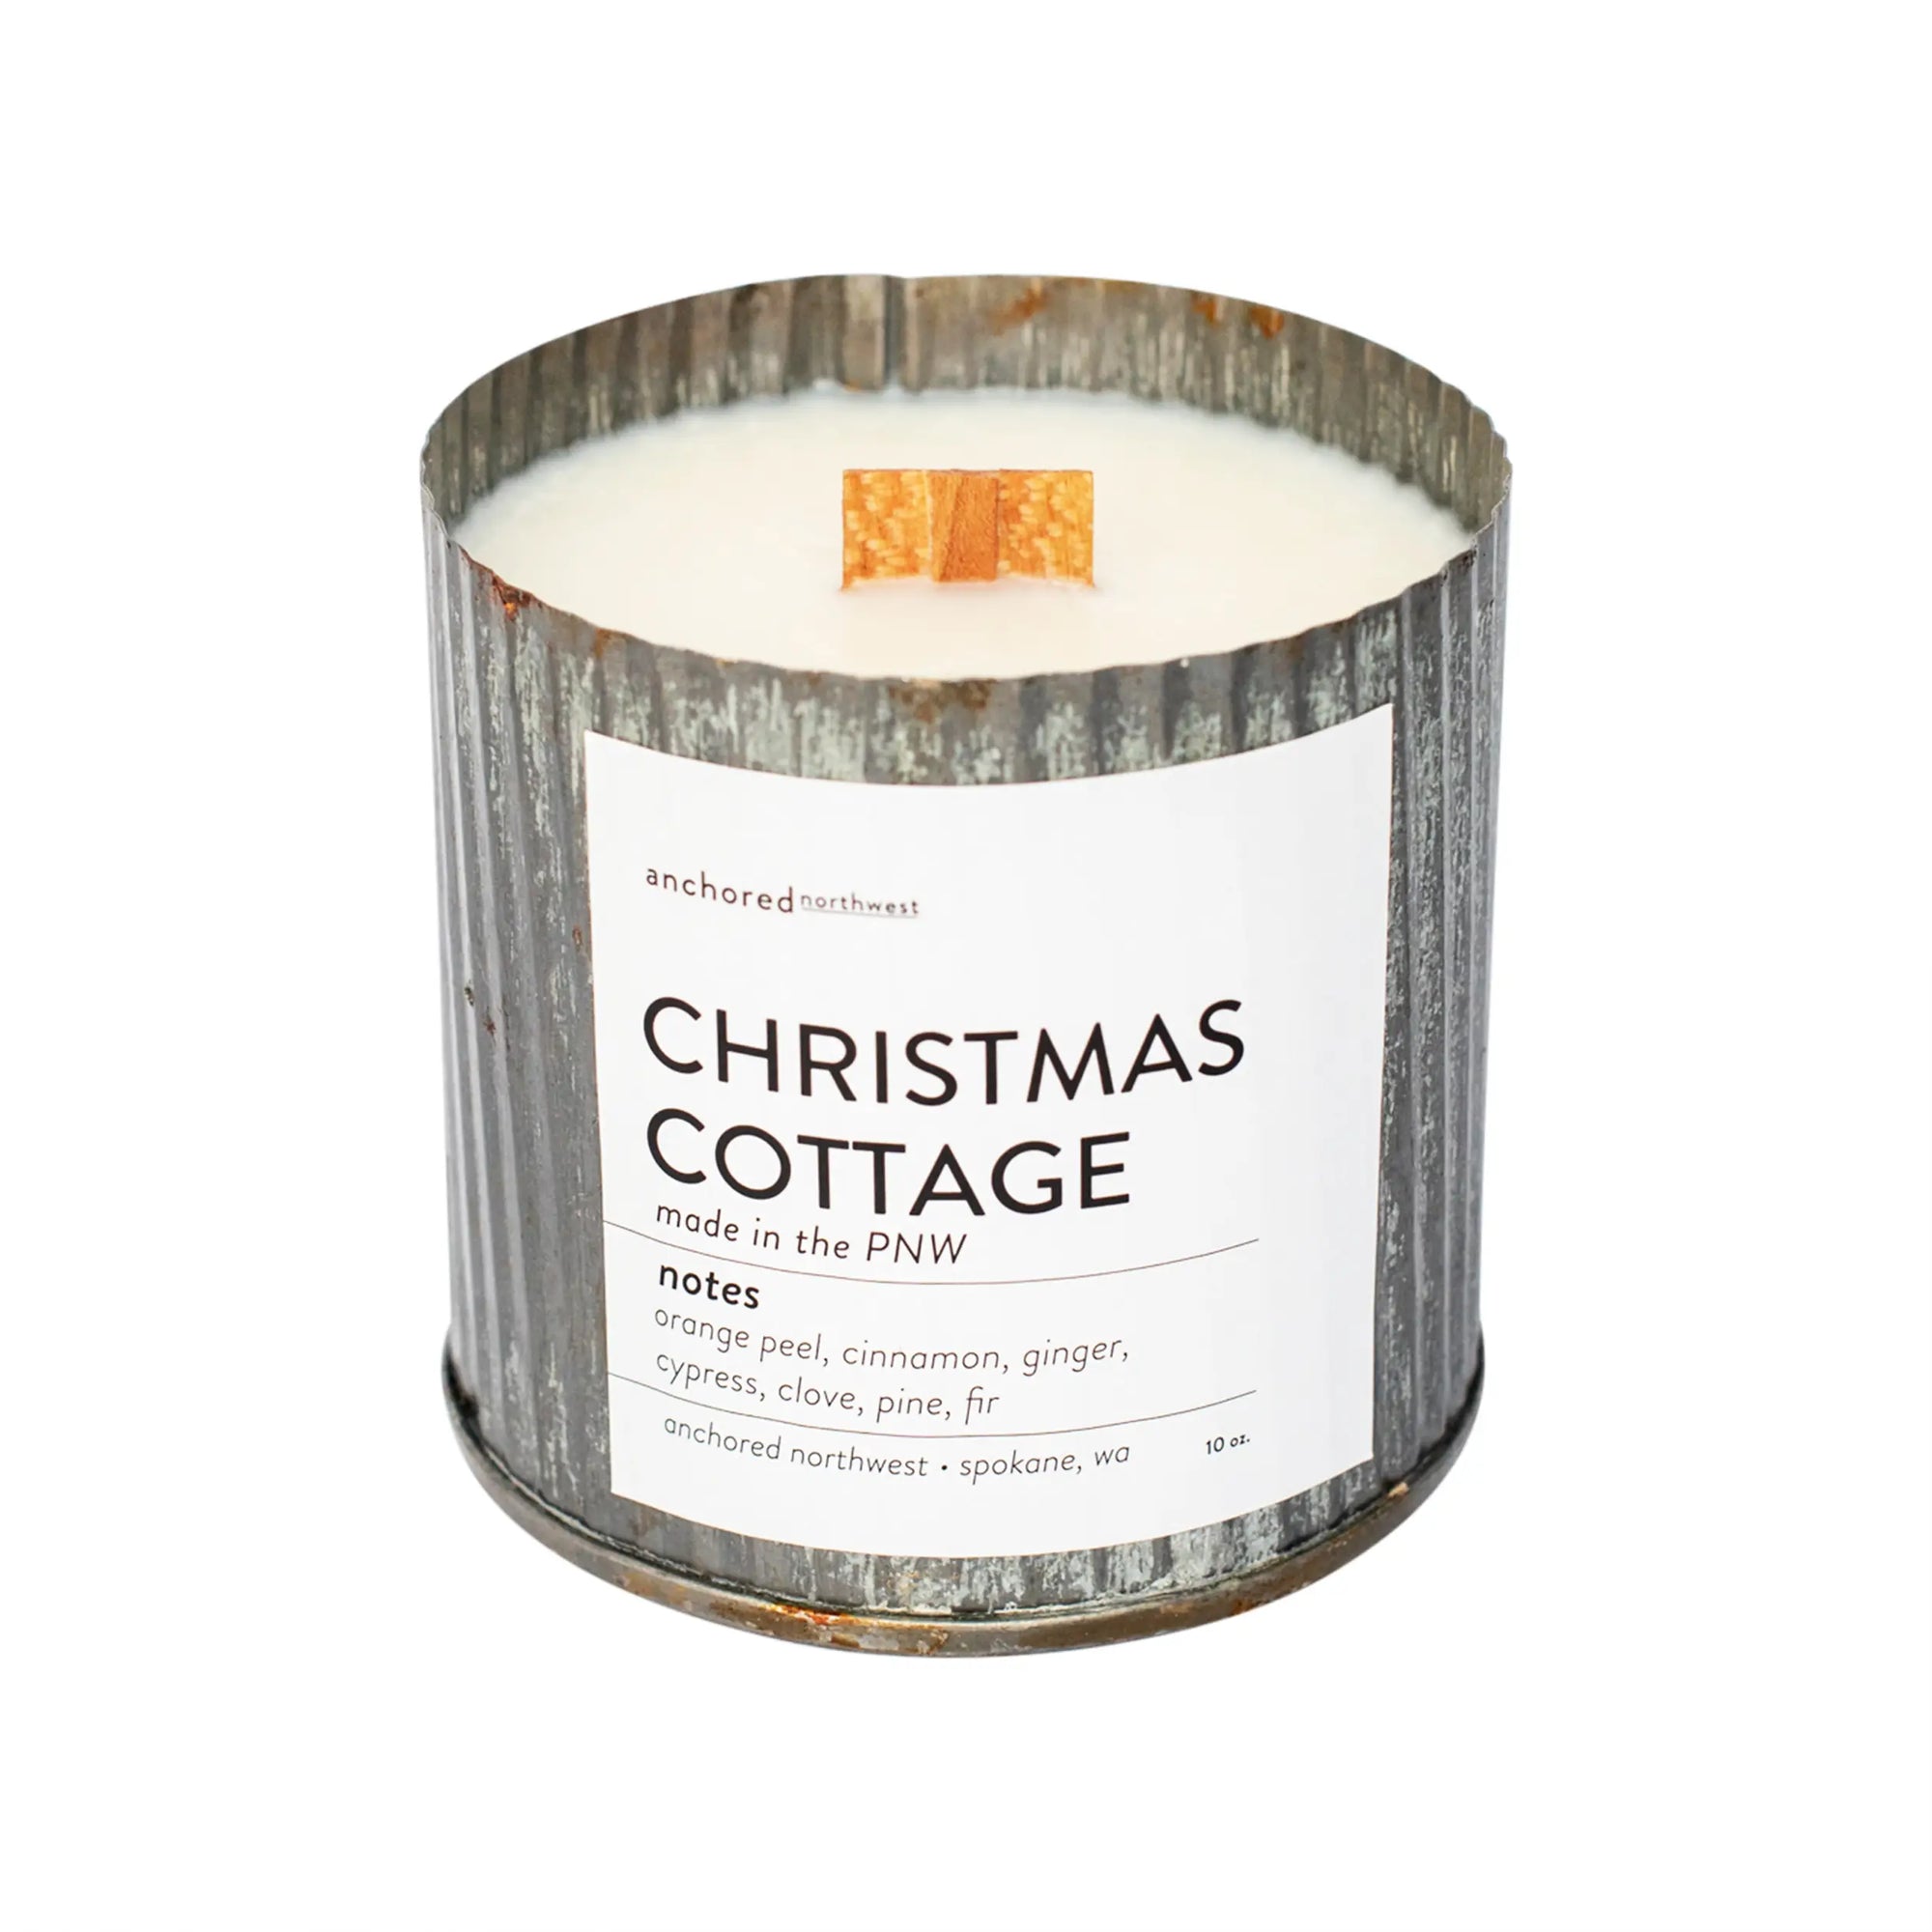 Christmas Cottage Wood Wick Rustic Candle - Anchored Northwest